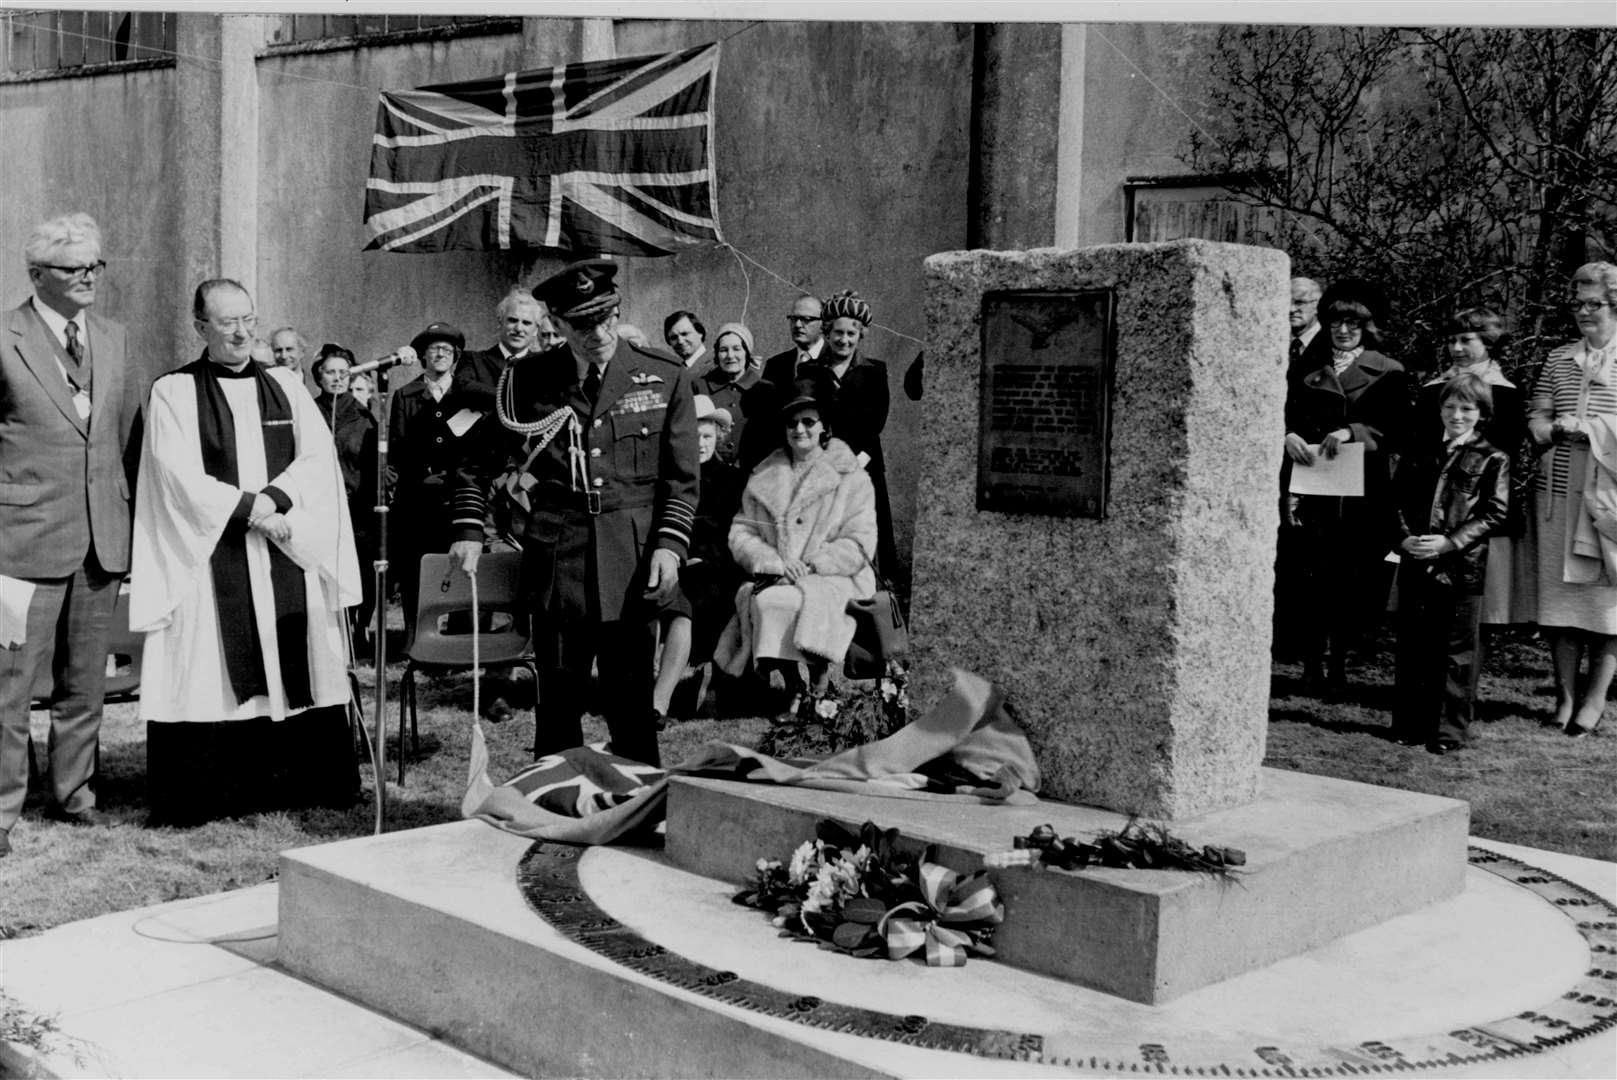 Marshall of the Royal Air Force, Sir William Dickson, unveiled the memorial to the men and women who served at Hawkinge, the nearest aerodrome to the enemy in two World Wars. The memorial was dedicated by the Rev John Chittenden in 1978. The Union Jack is flown upside-down as a sign of distress